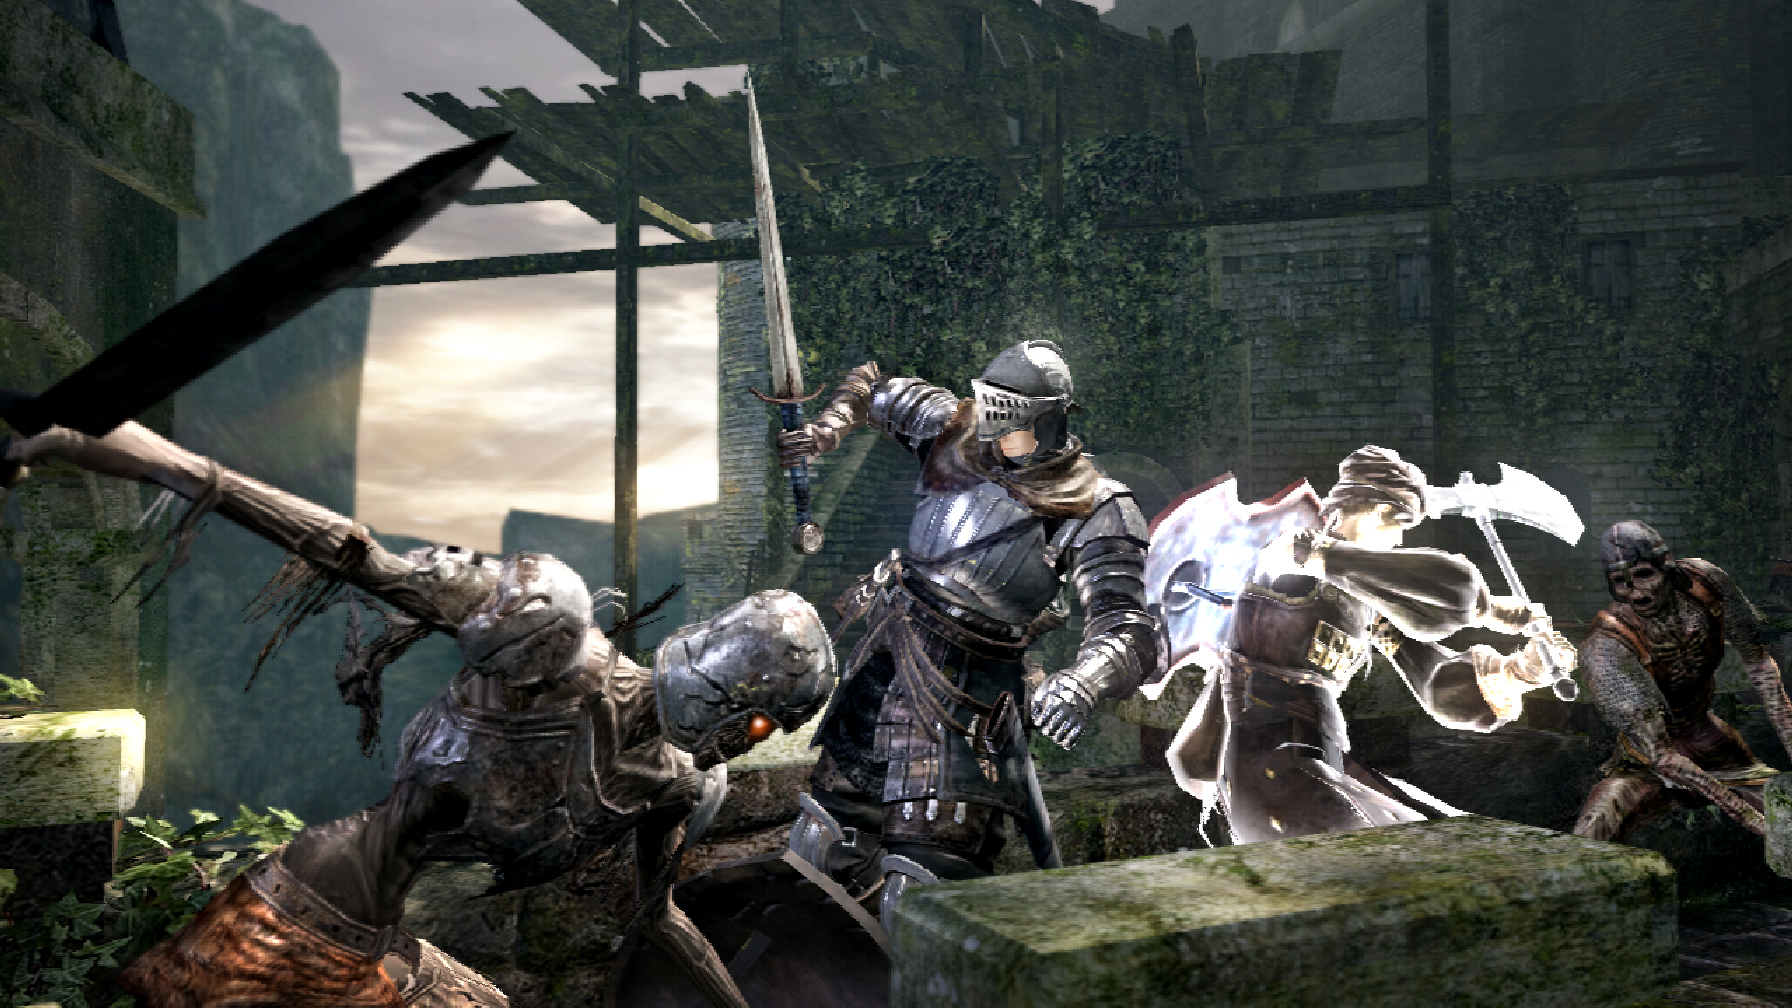 Experience Dark Souls 2 up close in this live-action teaser trailer